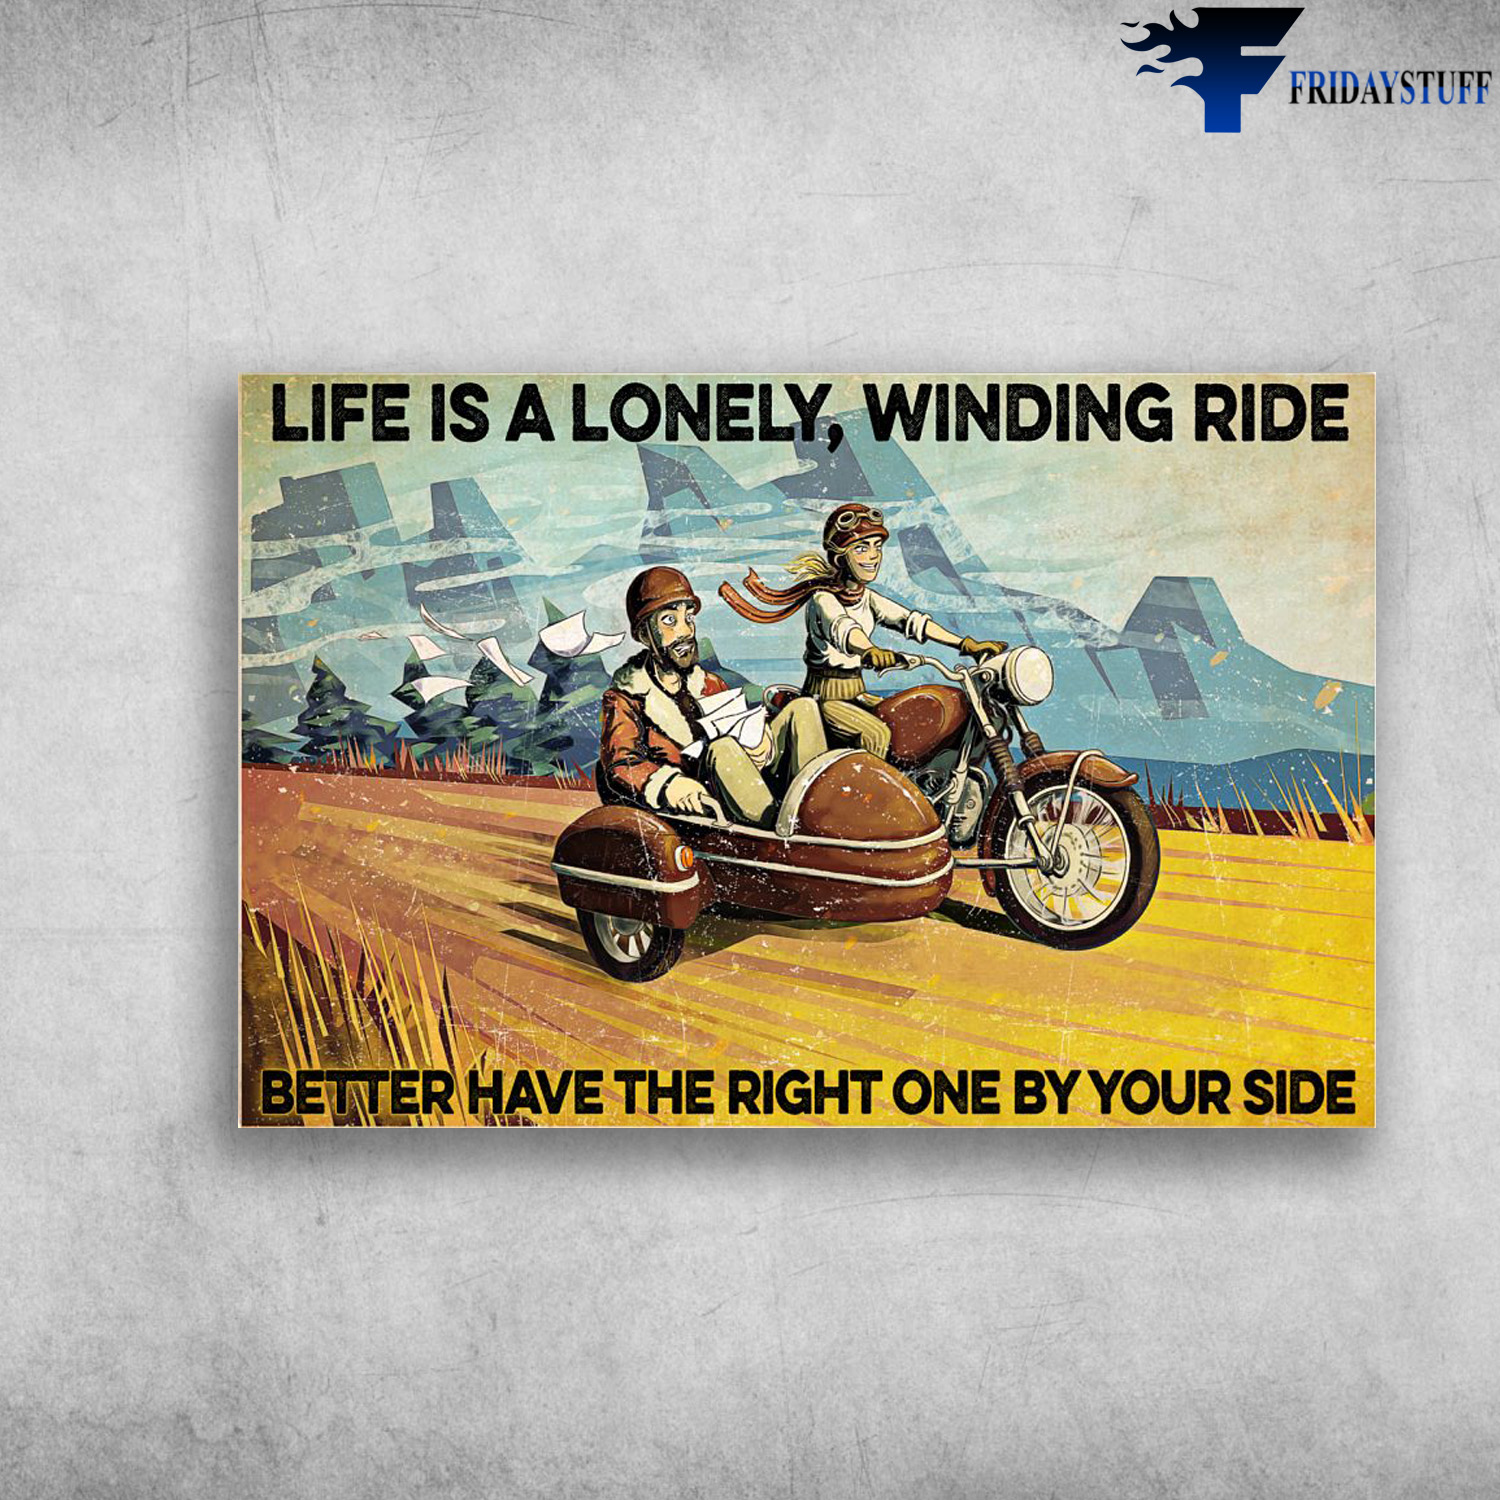 Biker Motoarcycle - Life is lonely winding ride, Better Have Right One Your Side